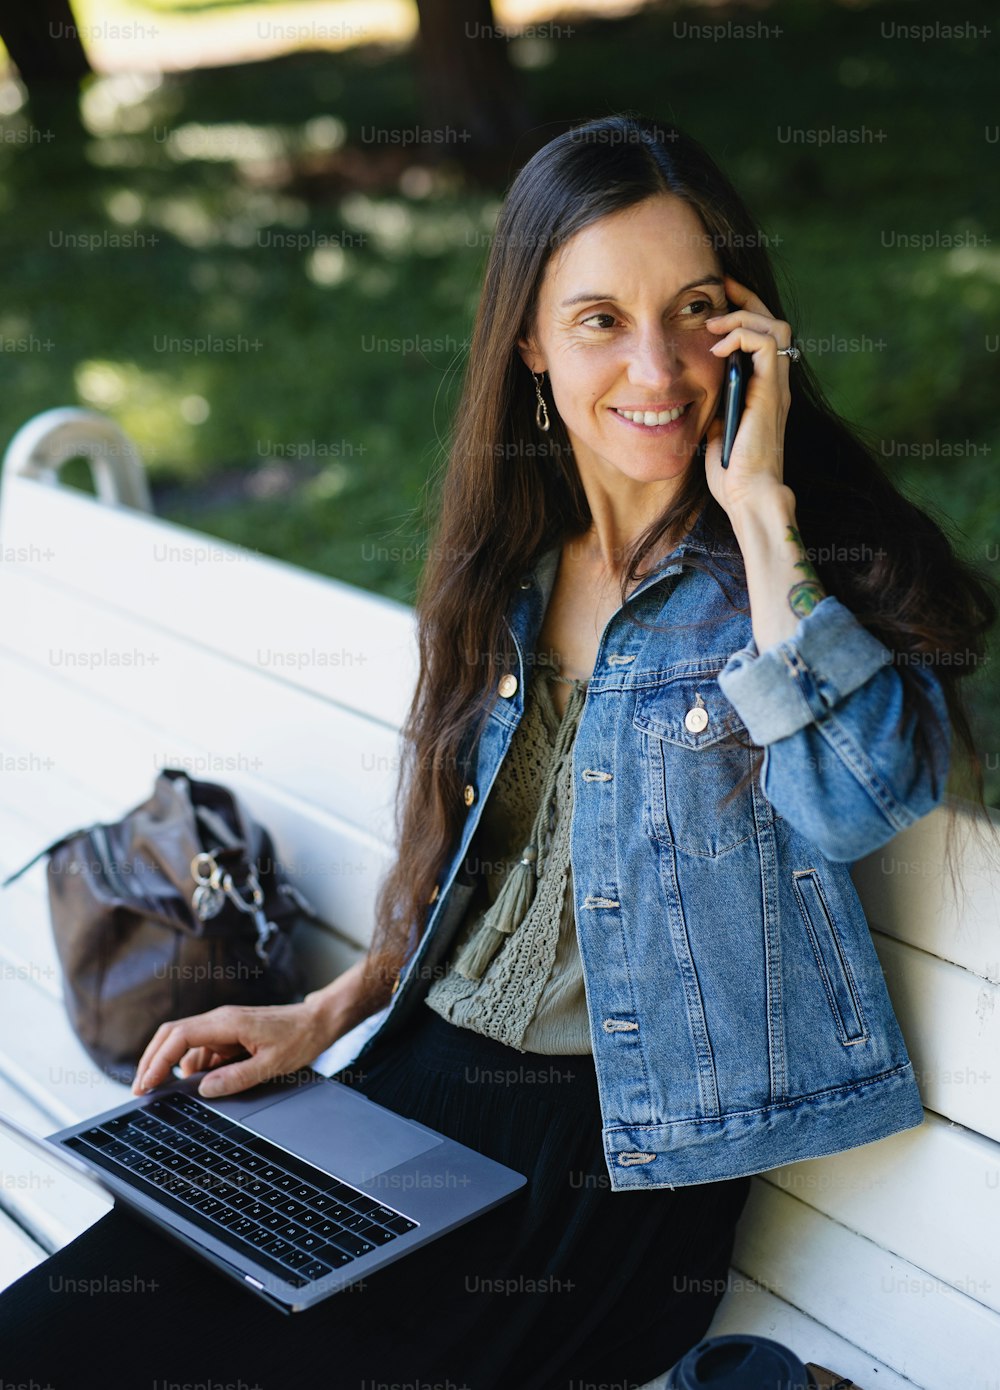 Mature woman with laptop and smartphone sitting on bench outdoors in city or town park, working.